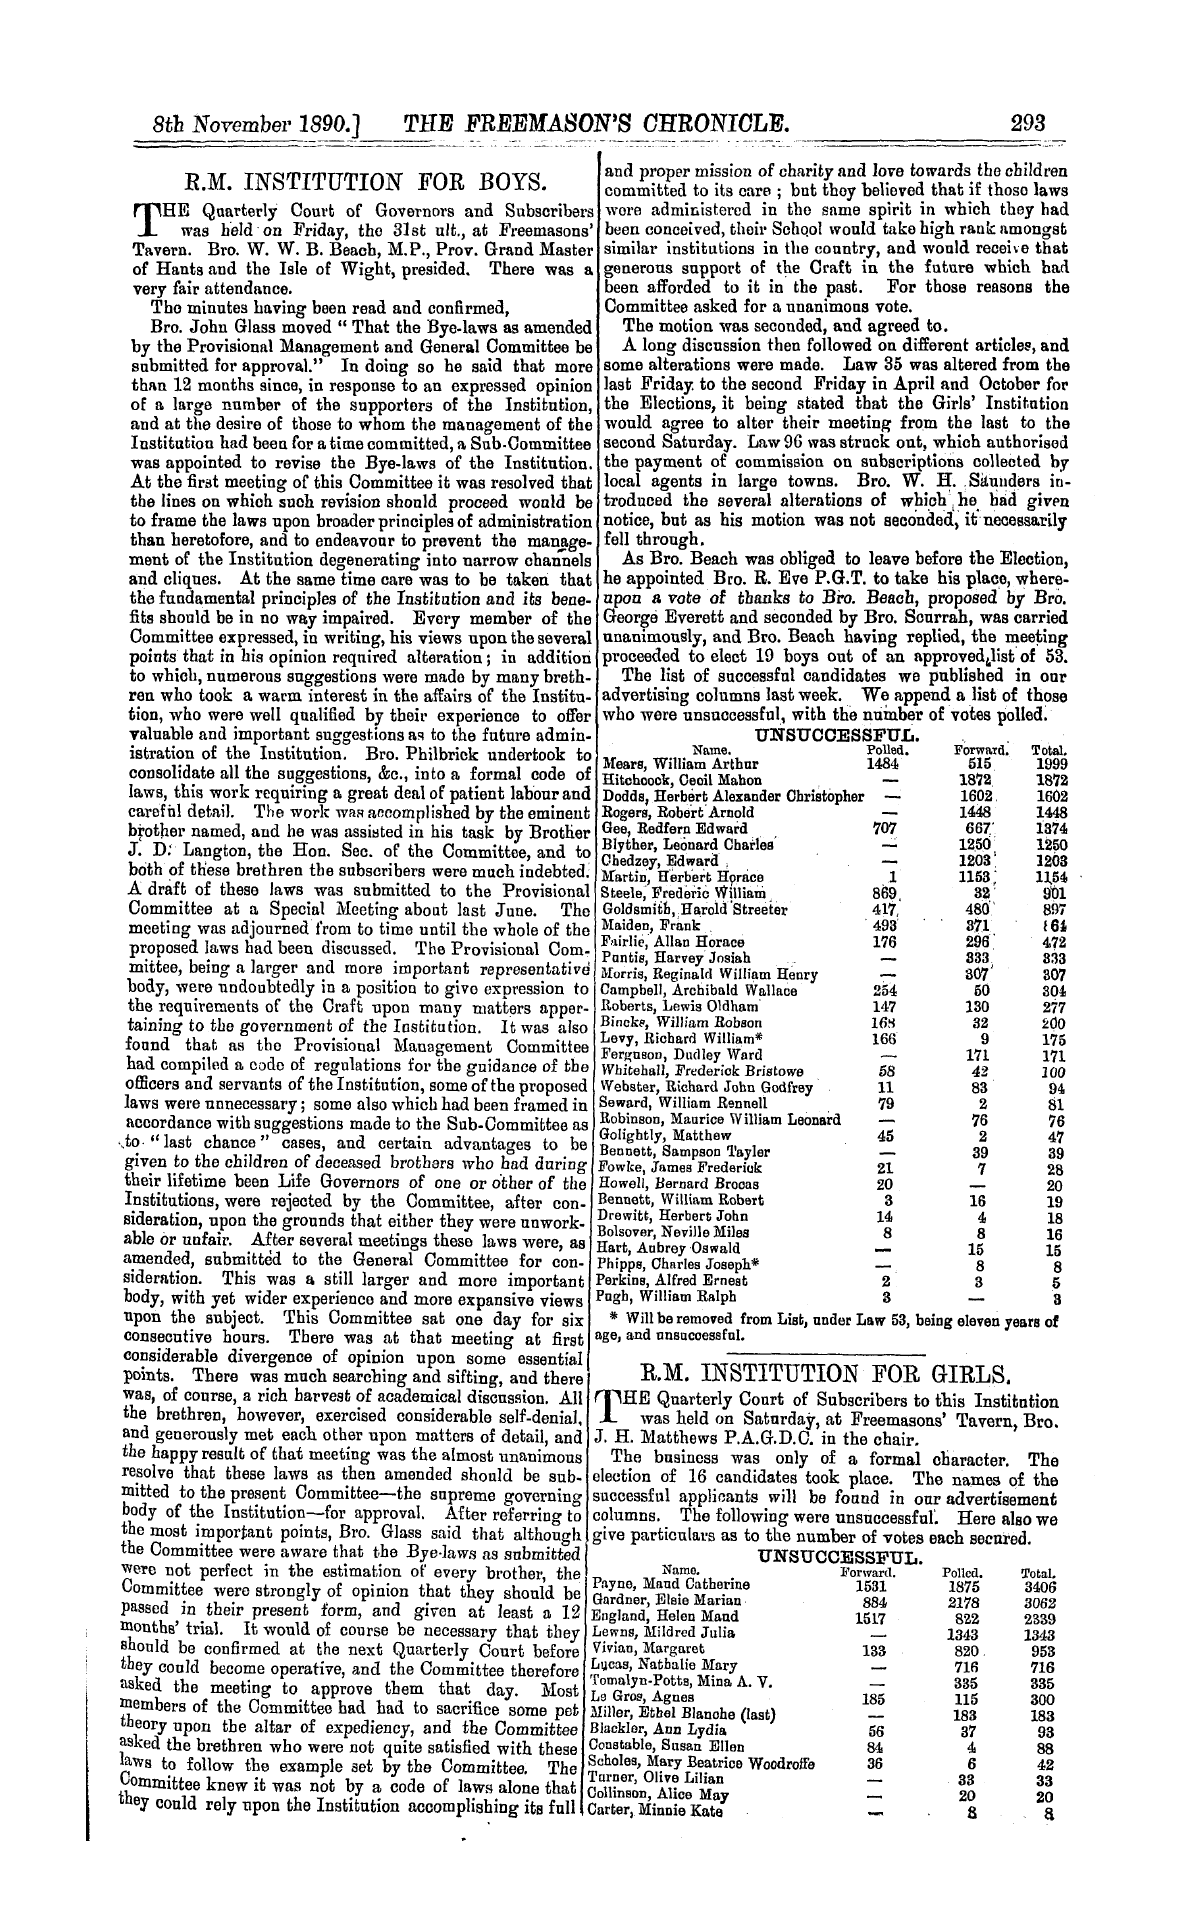 The Freemason's Chronicle: 1890-11-08 - R.M. Institution For Boys.